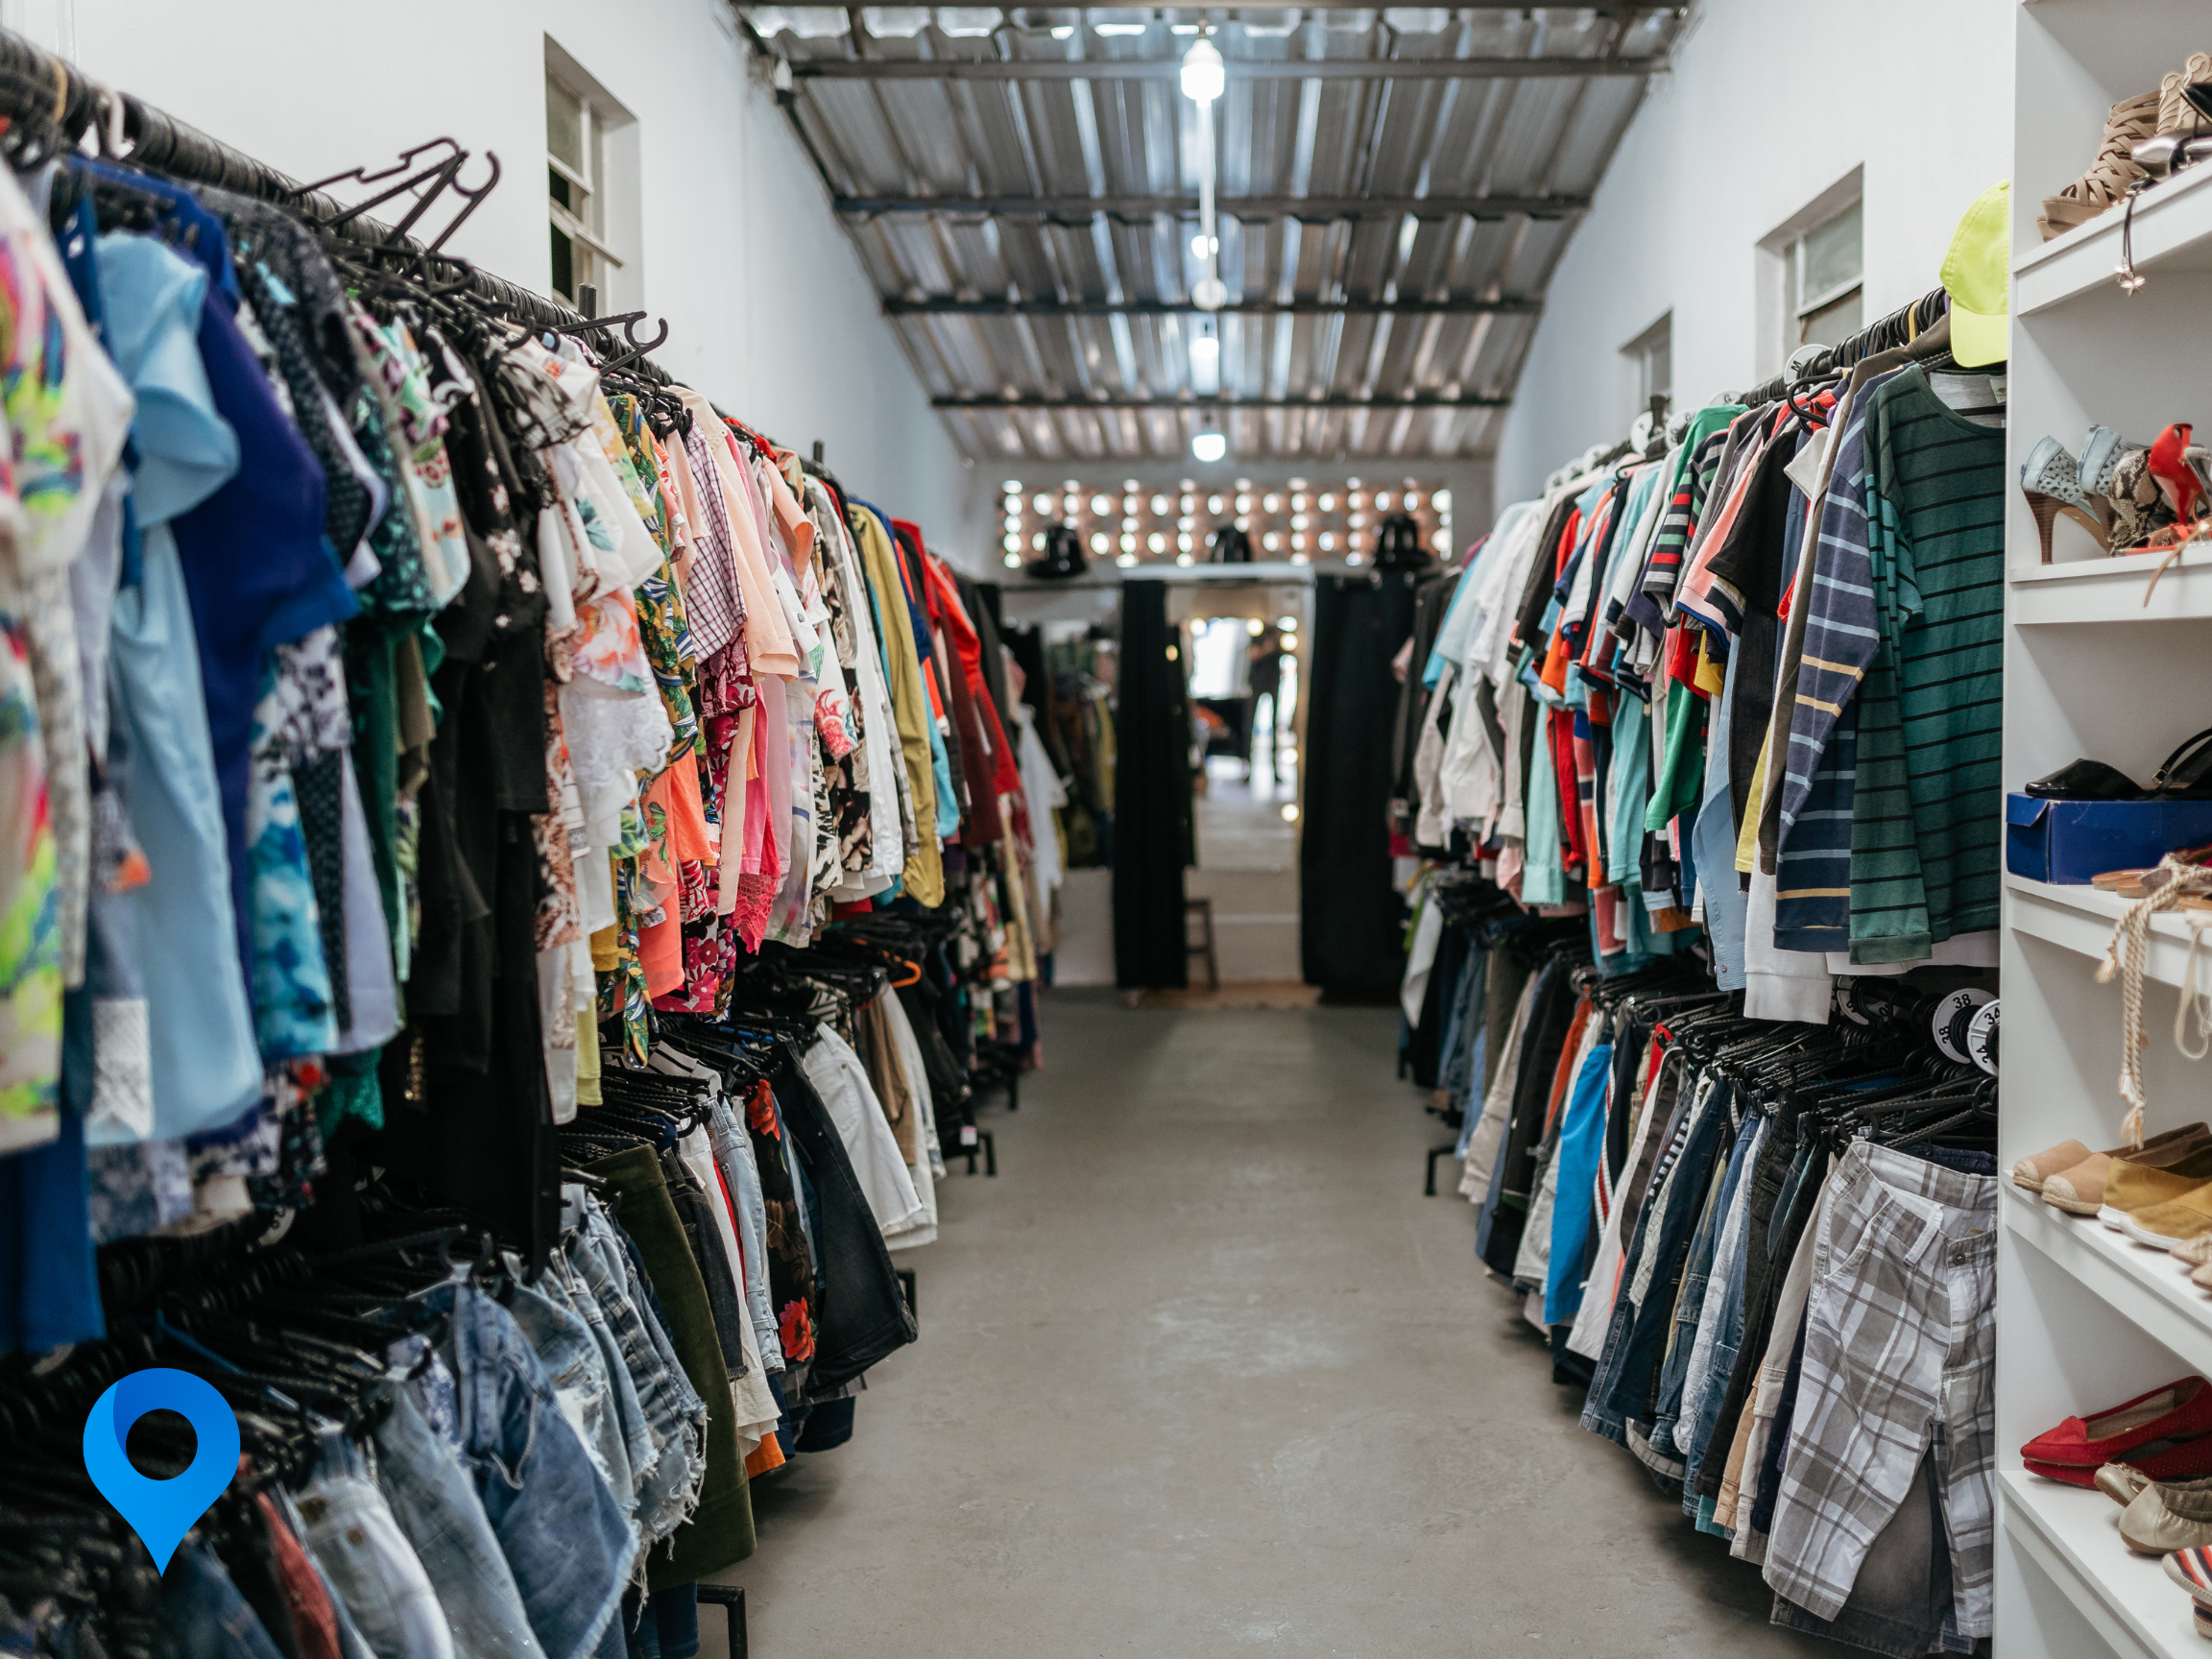 How Can You Find the Best Deals at Murfreesboro Thrift Stores?